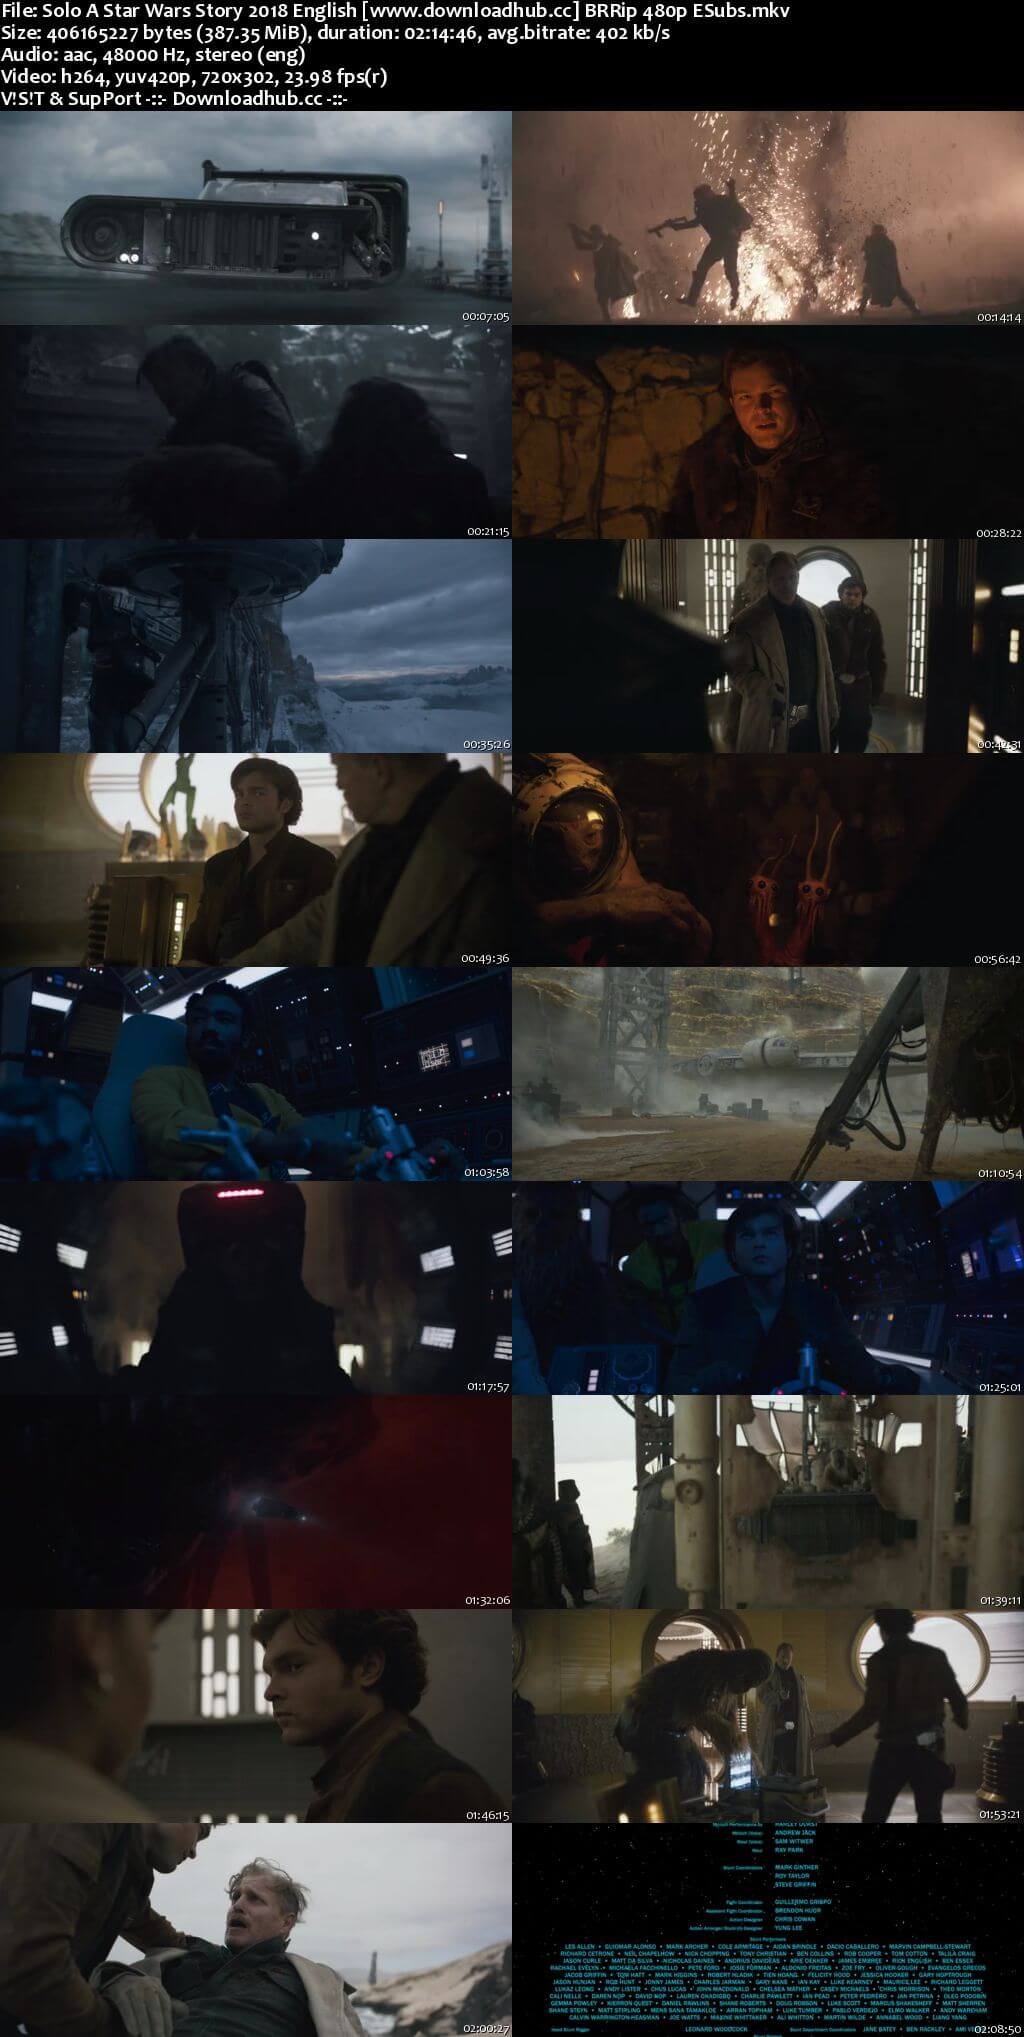 Solo A Star Wars Story 2018 English 350MB BRRip 480p ESubs